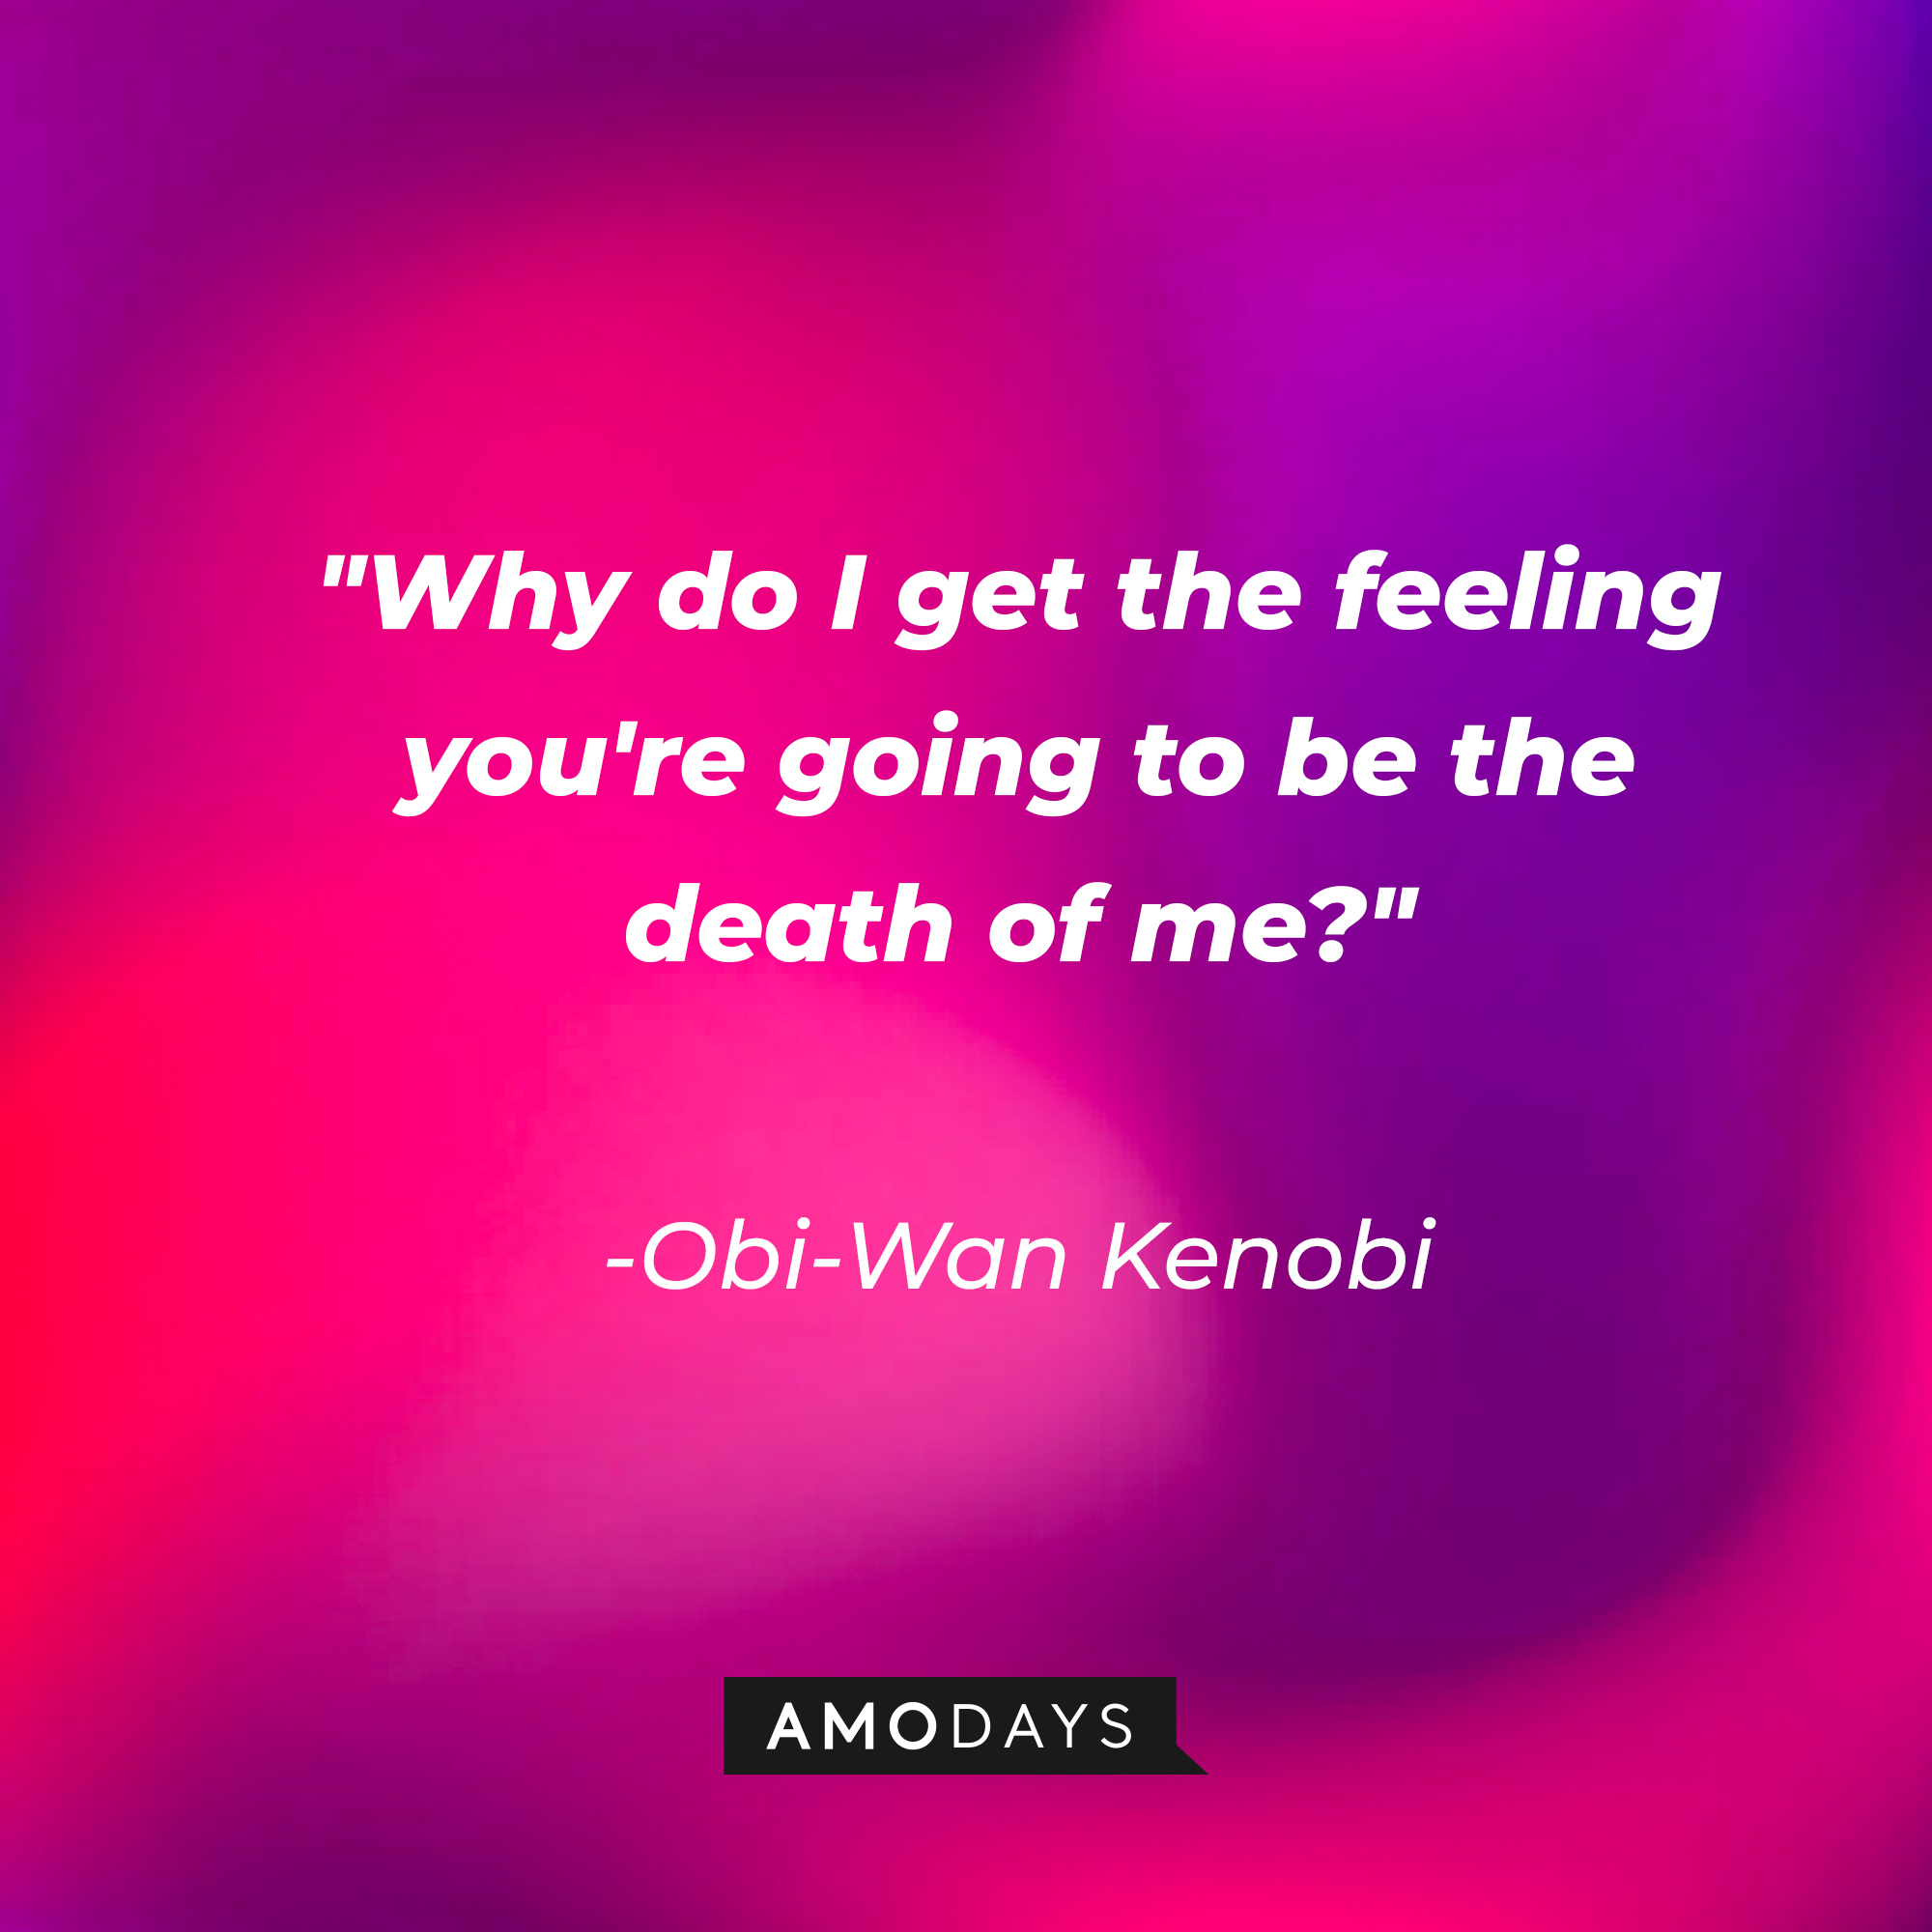 Obi-Wan Kenobi's quote: "Why do I get the feeling you're going to be the death of me?" | Source: AmoDays